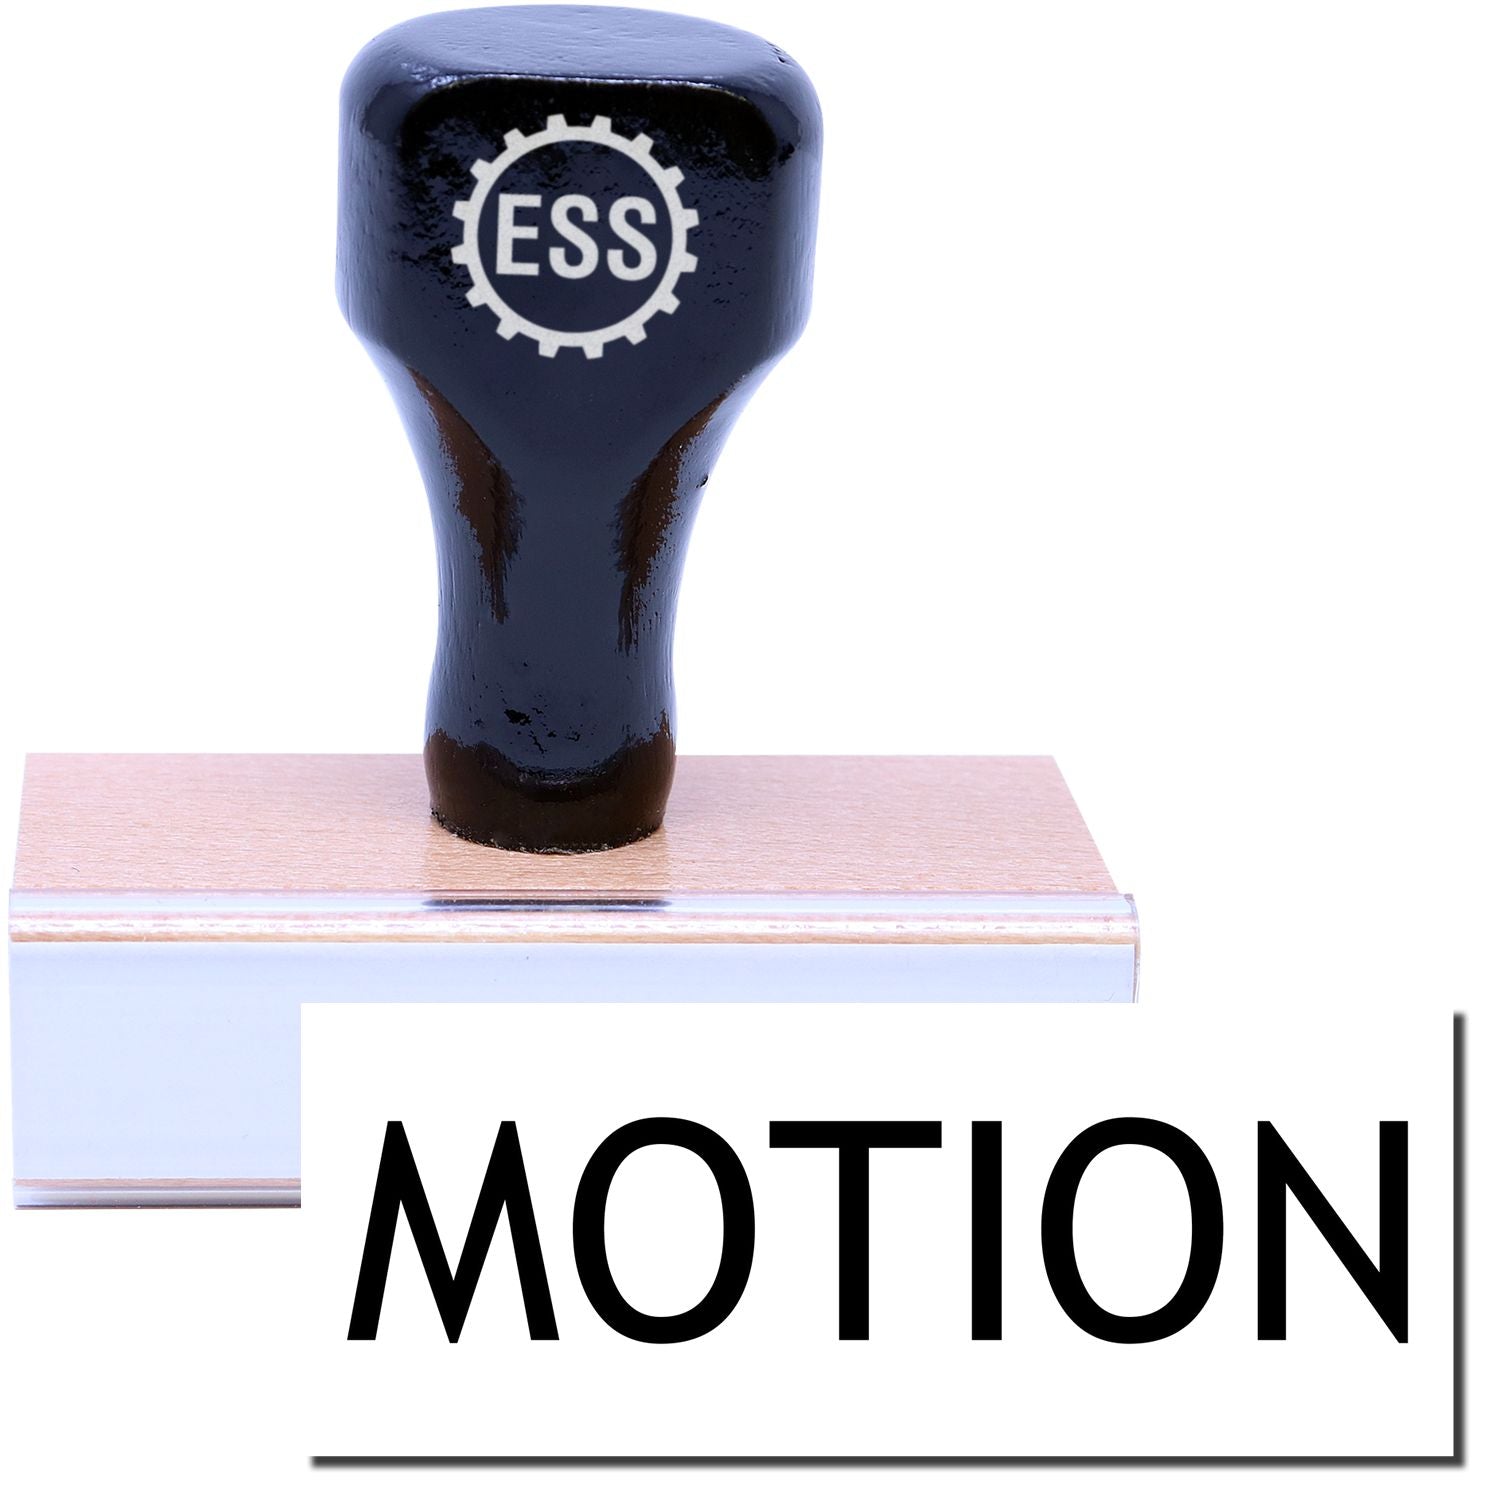 A stock office rubber stamp with a stamped image showing how the text "MOTION" is displayed after stamping.